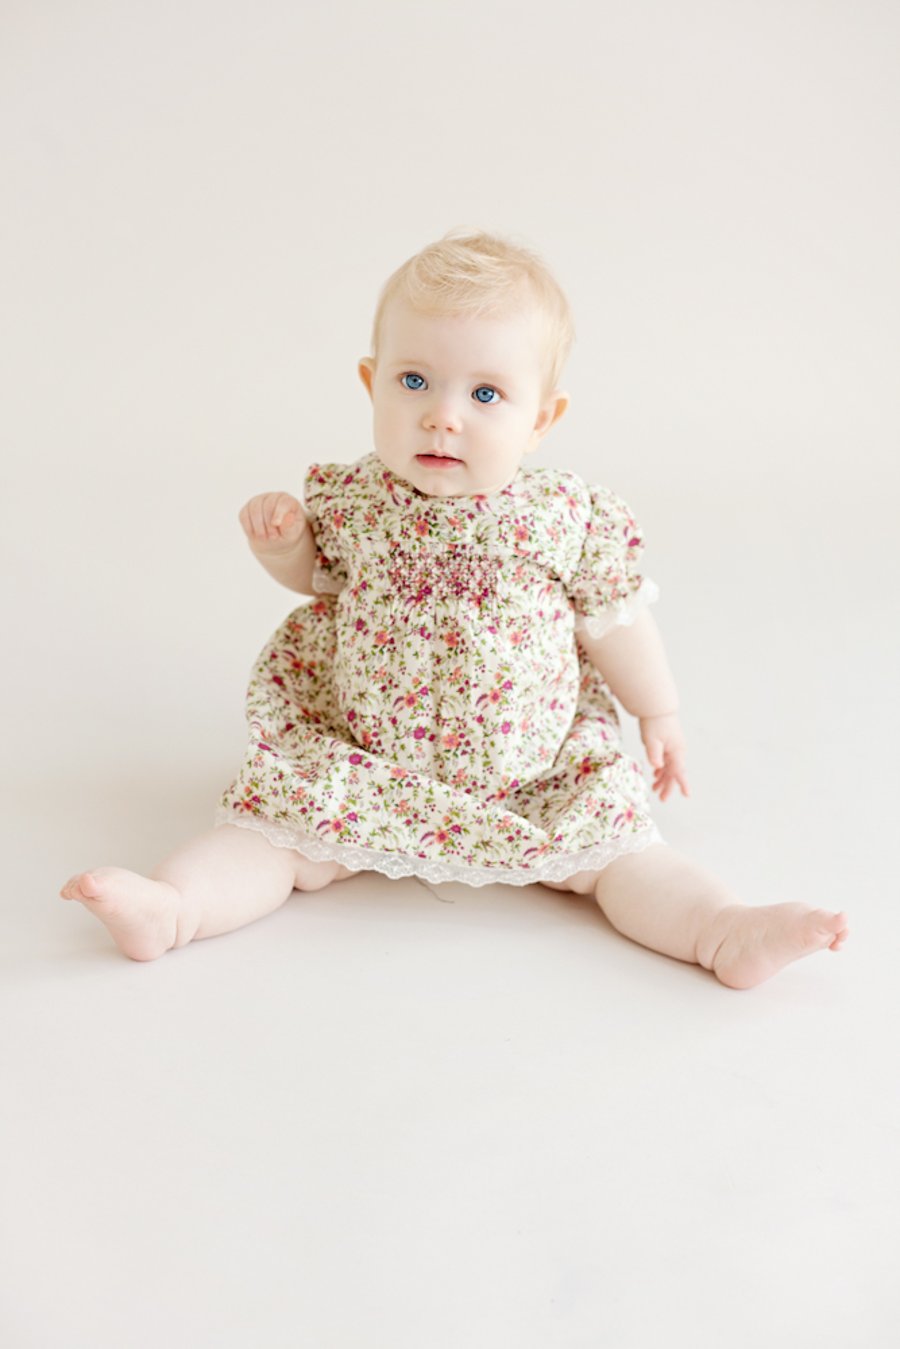 Baby Smocked dress in Liberty Tana lawn, 6-12months